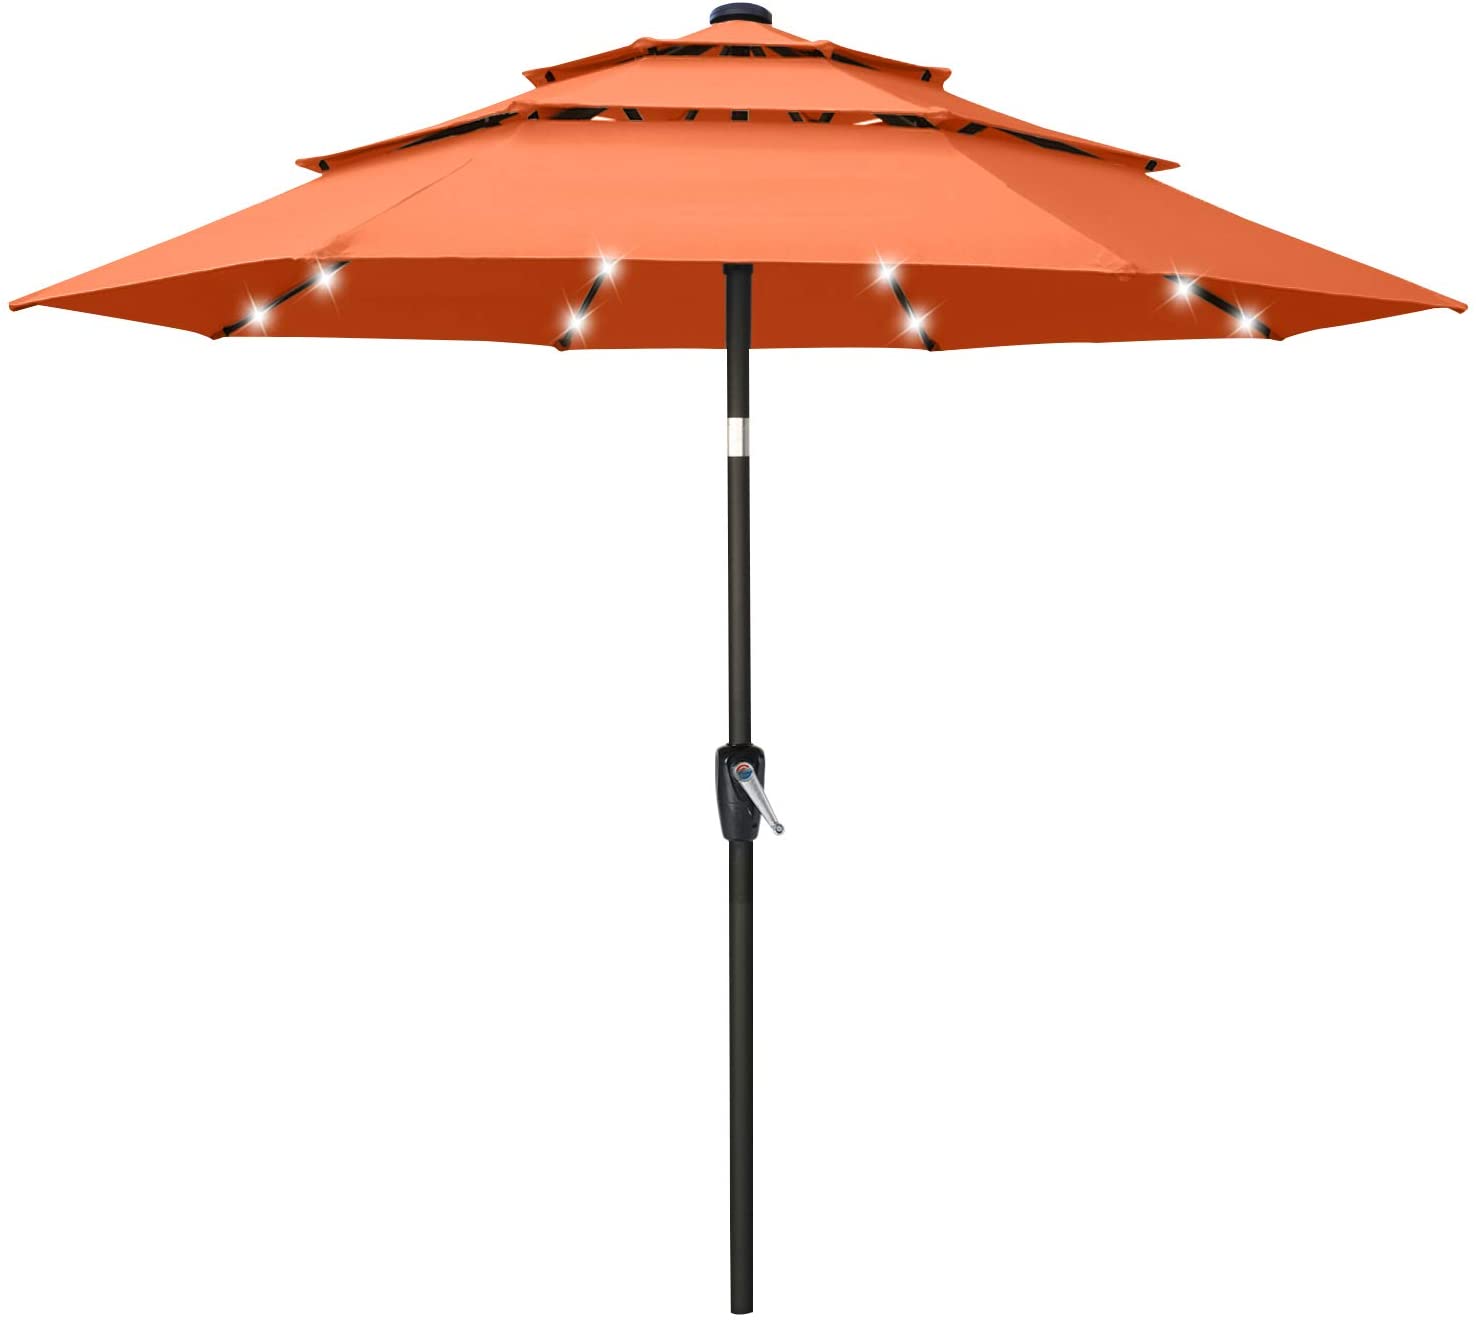 Solar 3 Tiers Patio Umbrella Outdoorwith 32 LED Ventilation - ABC-CANOPY